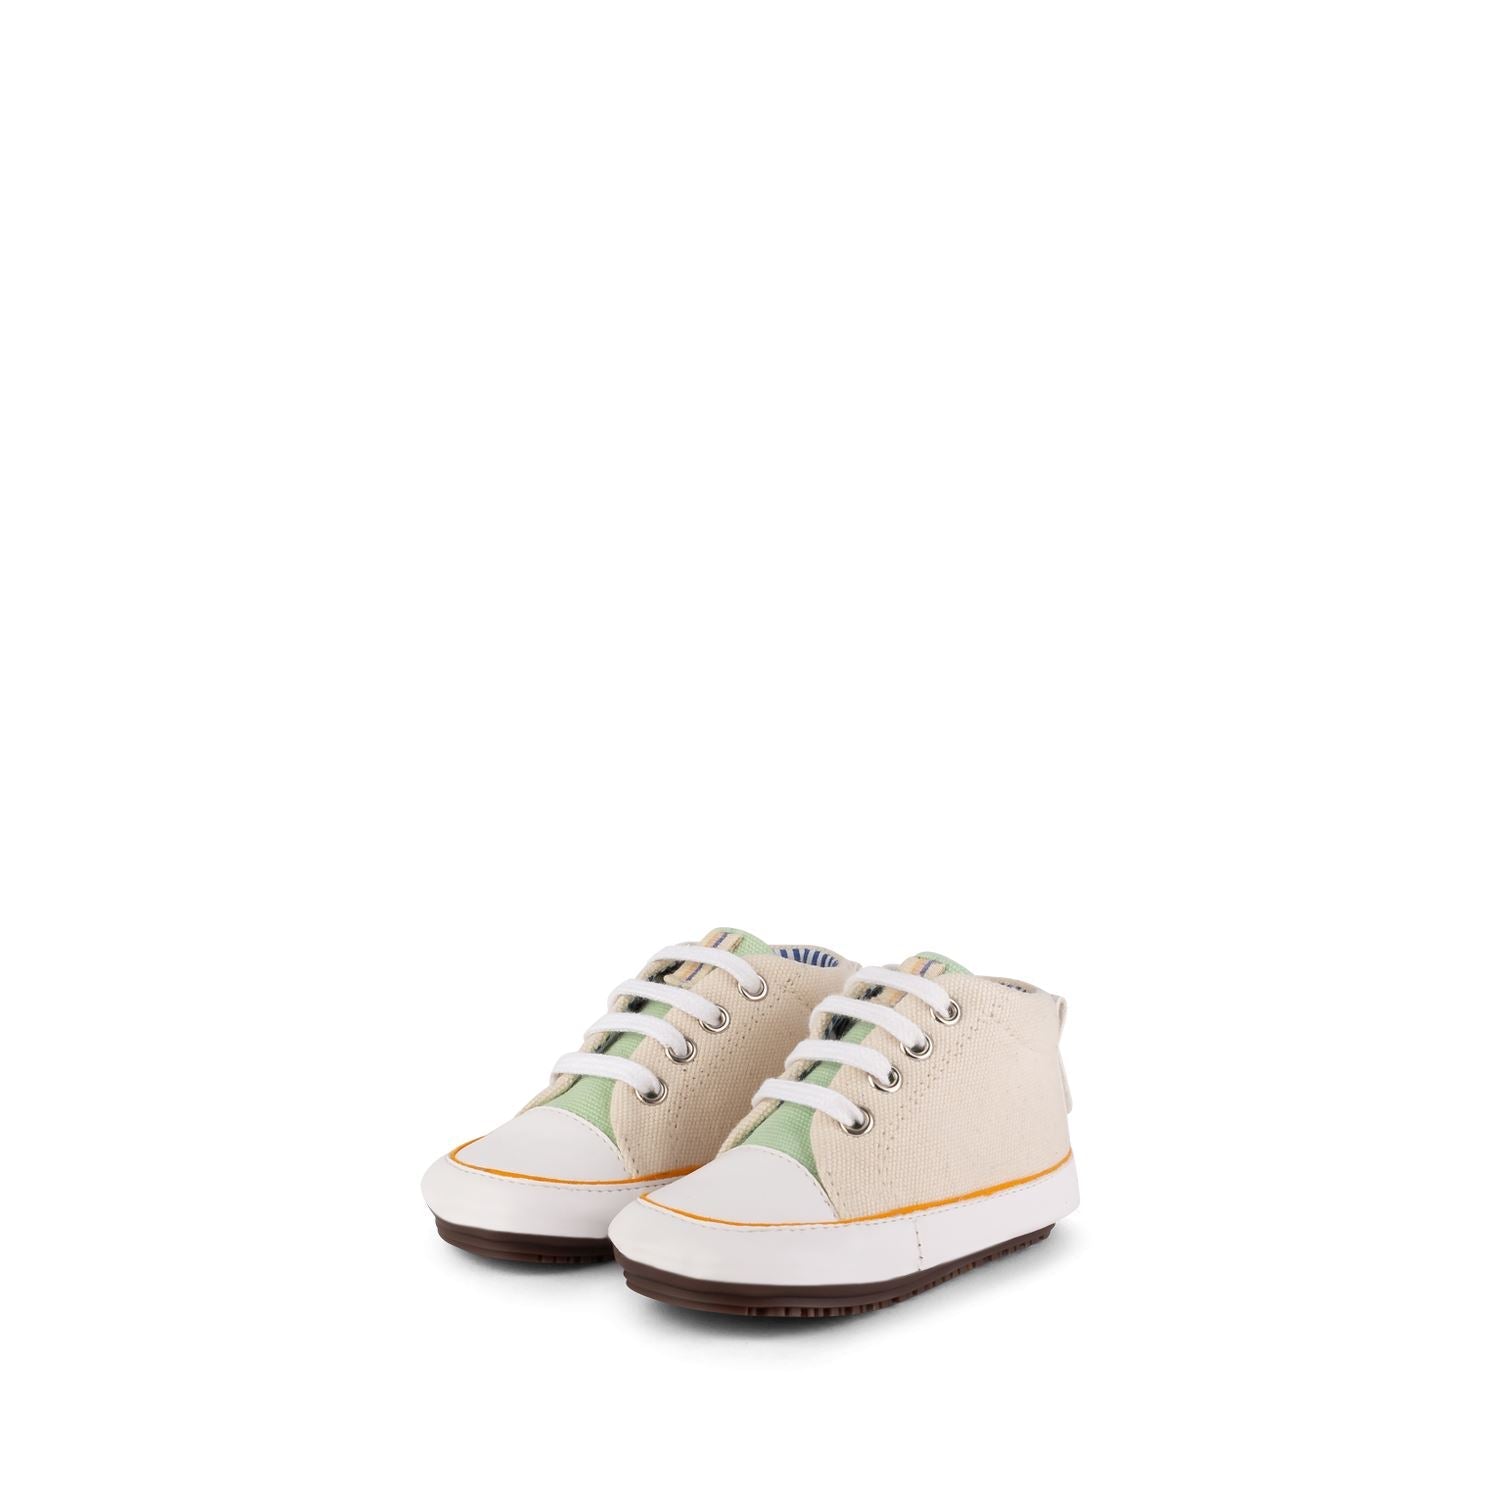 Cream/Anis Eco Sneaker Booties Shoes & Booties Dulis Shoes 